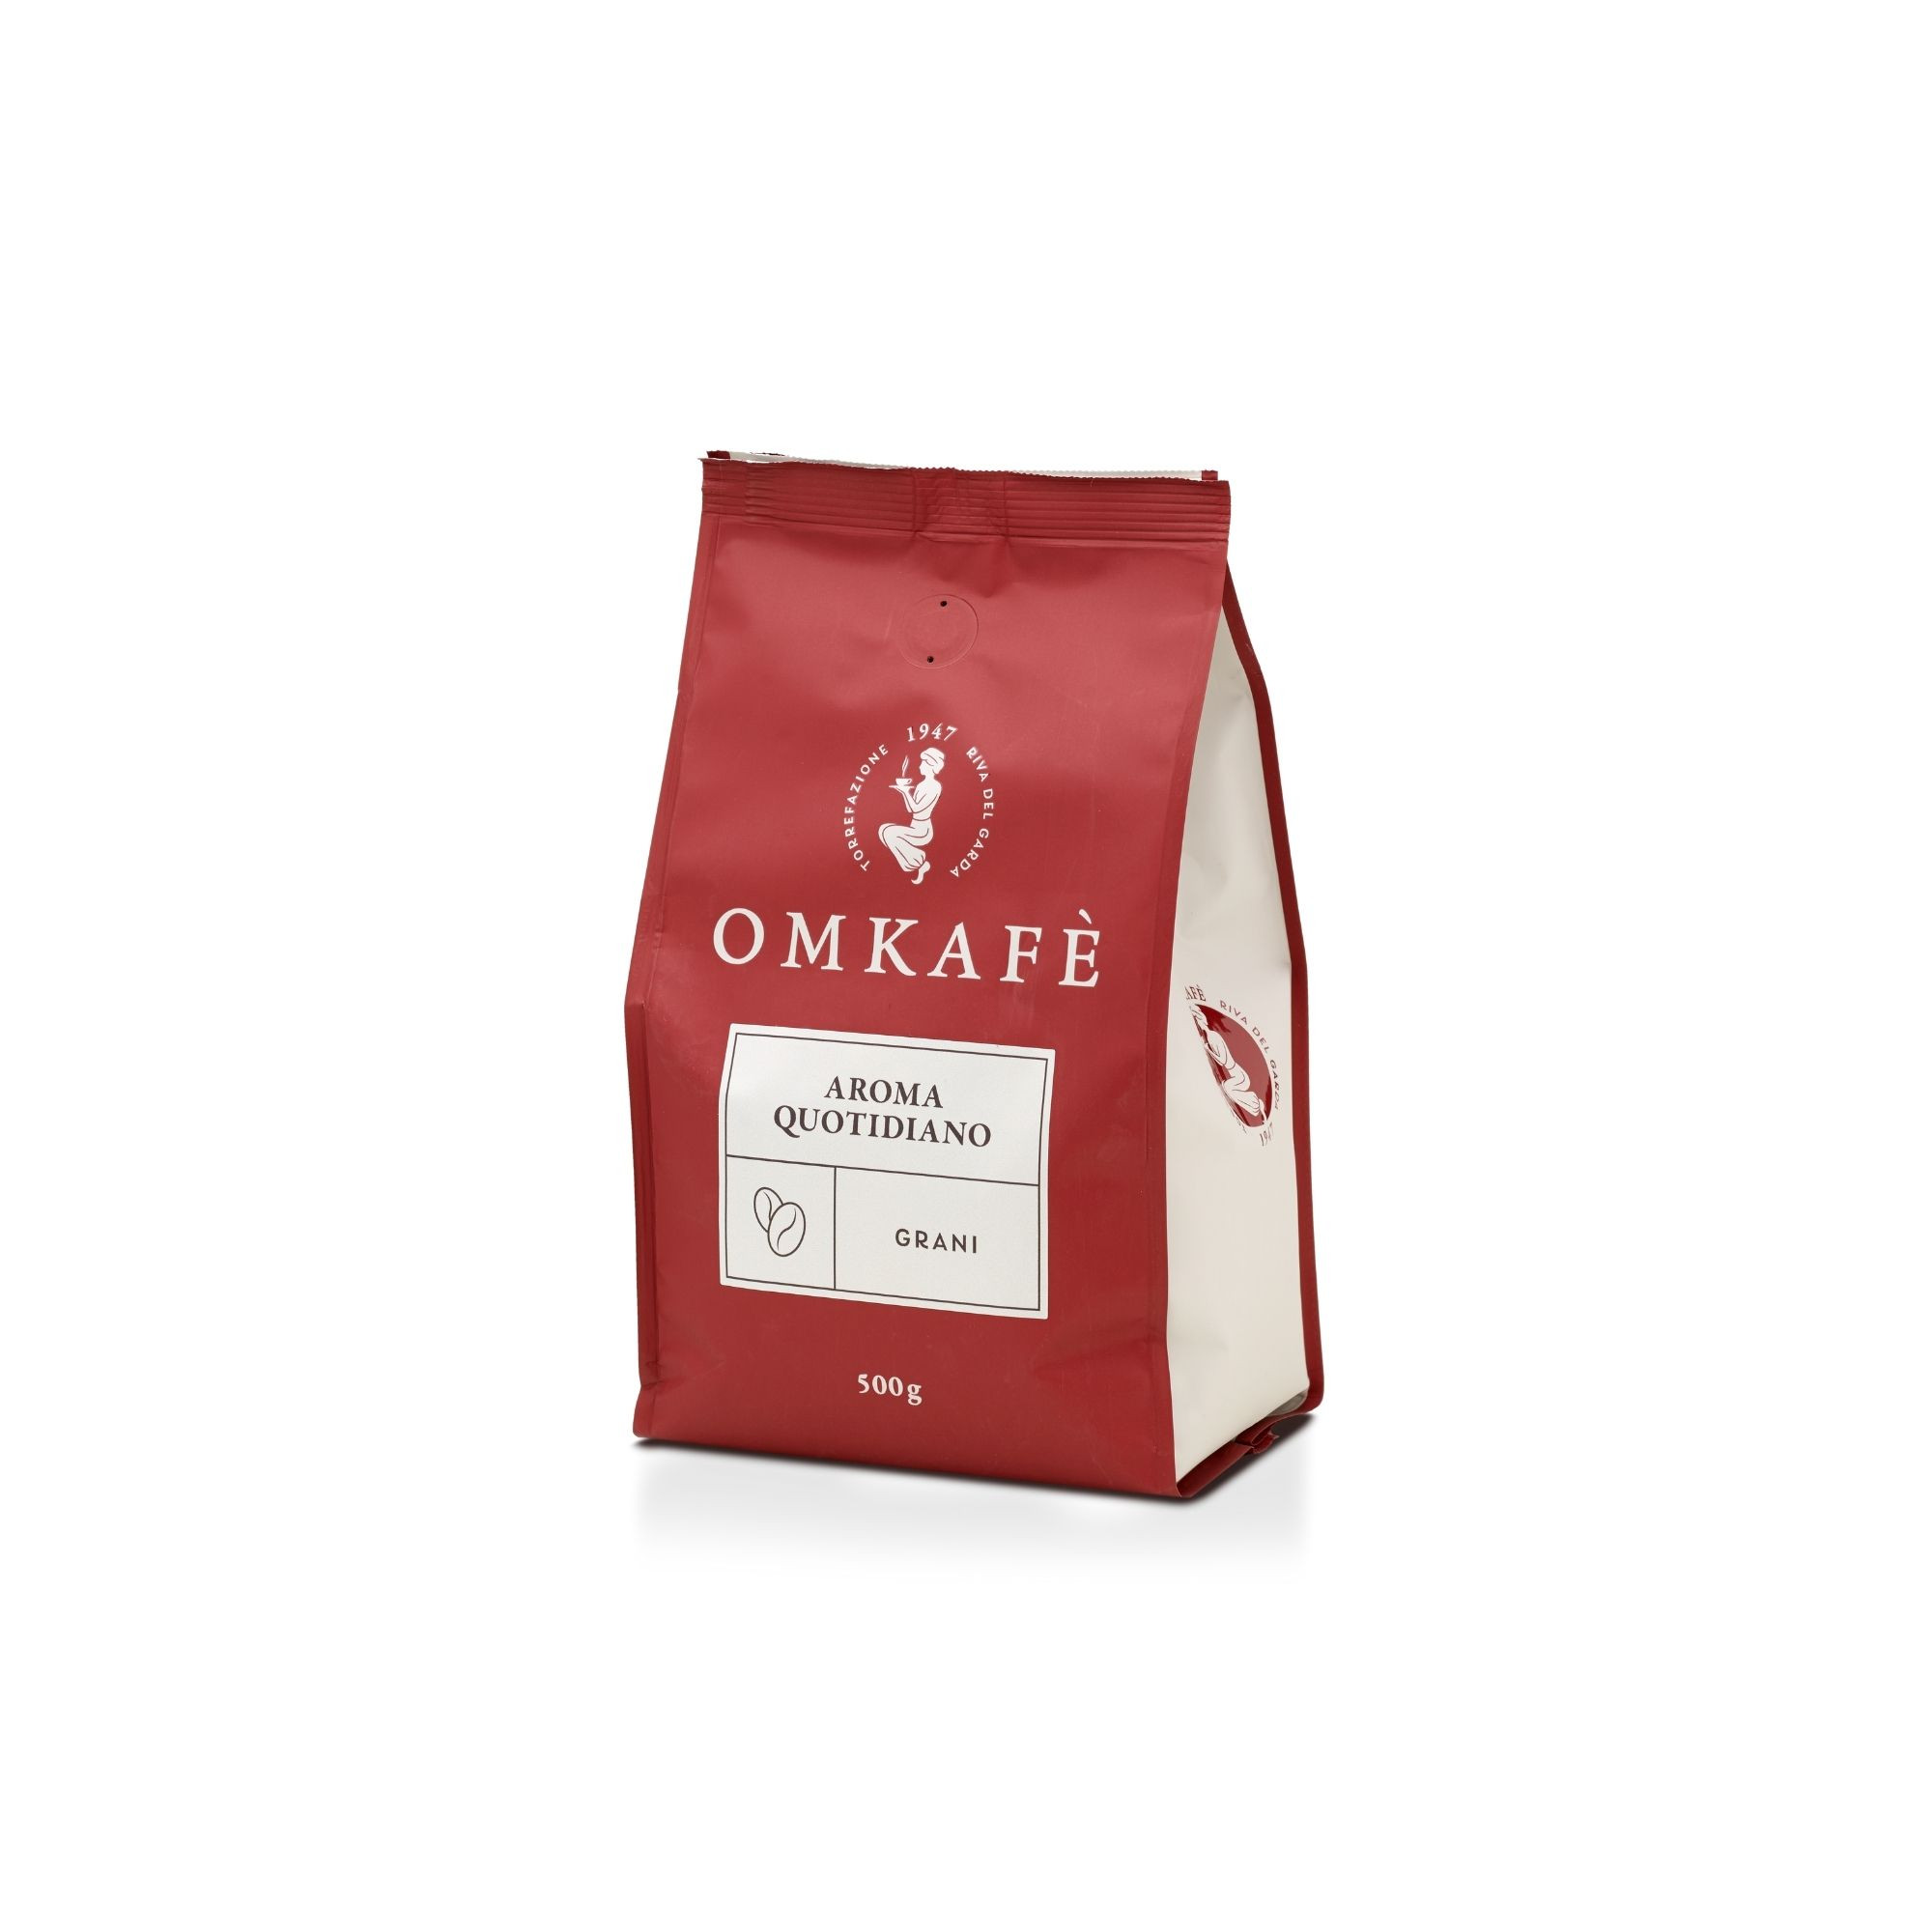 AROMA QUOTIDIANO beans - 500 g